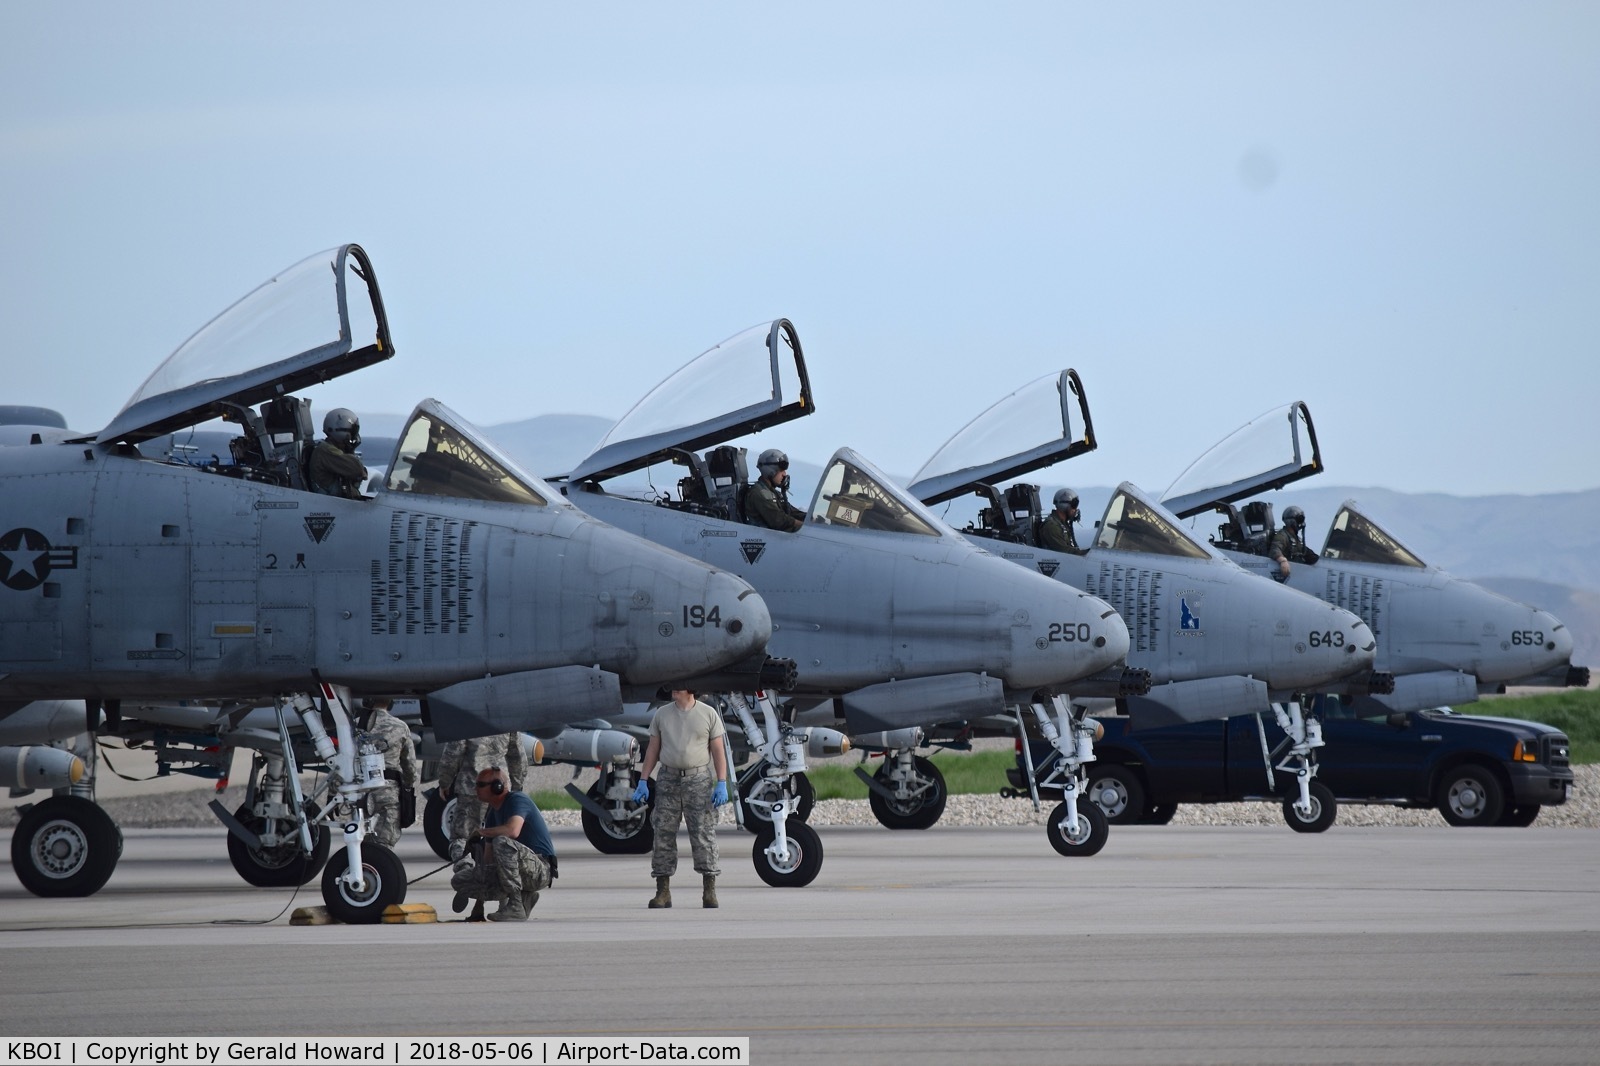 Boise Air Terminal/gowen Fld Airport (BOI) - A-10C under going pre flight checks. 190th Fighter Sq., 124th Fighter Wing, Idaho ANG.